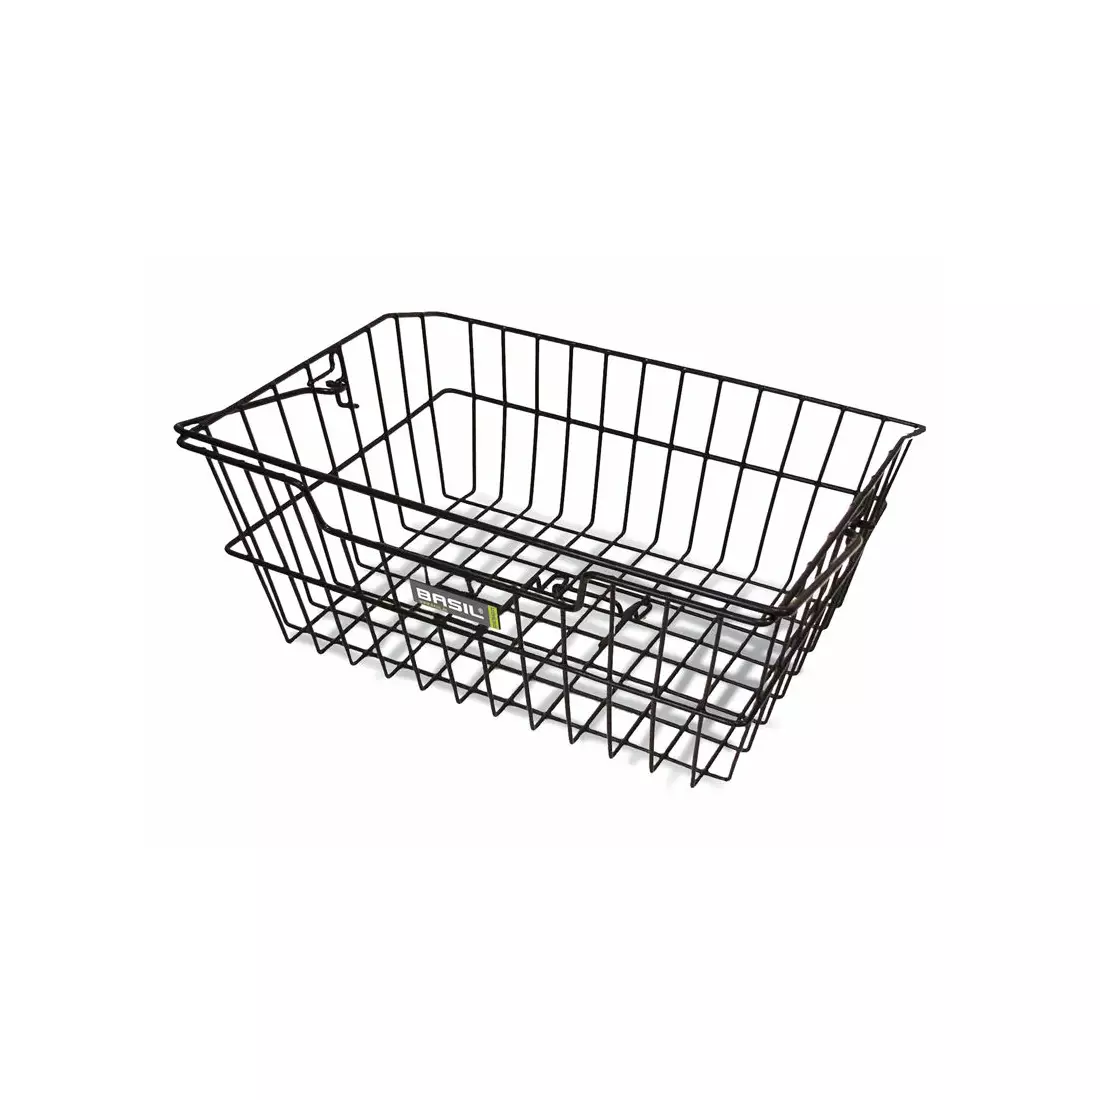 BASIL CAIRO bicycle basket for the rear carrier + fixing hooks, steel black BAS-11011